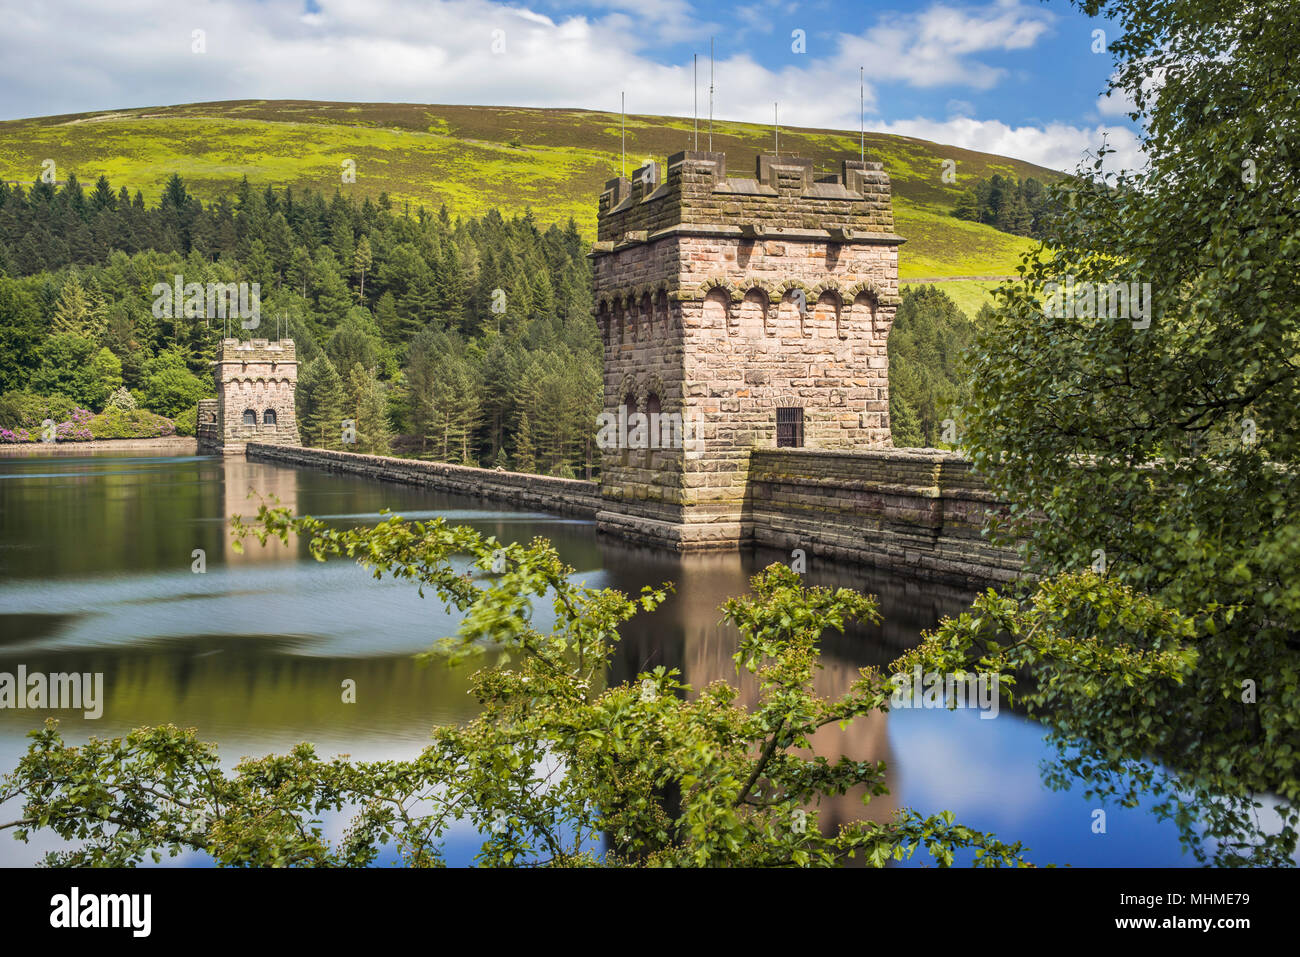 The Derwemt Reservoir Dam in the Peak District, Derbyshire, England. The Dam is famous for it's appearance in the British movie, 'The Dambusters'. Stock Photo